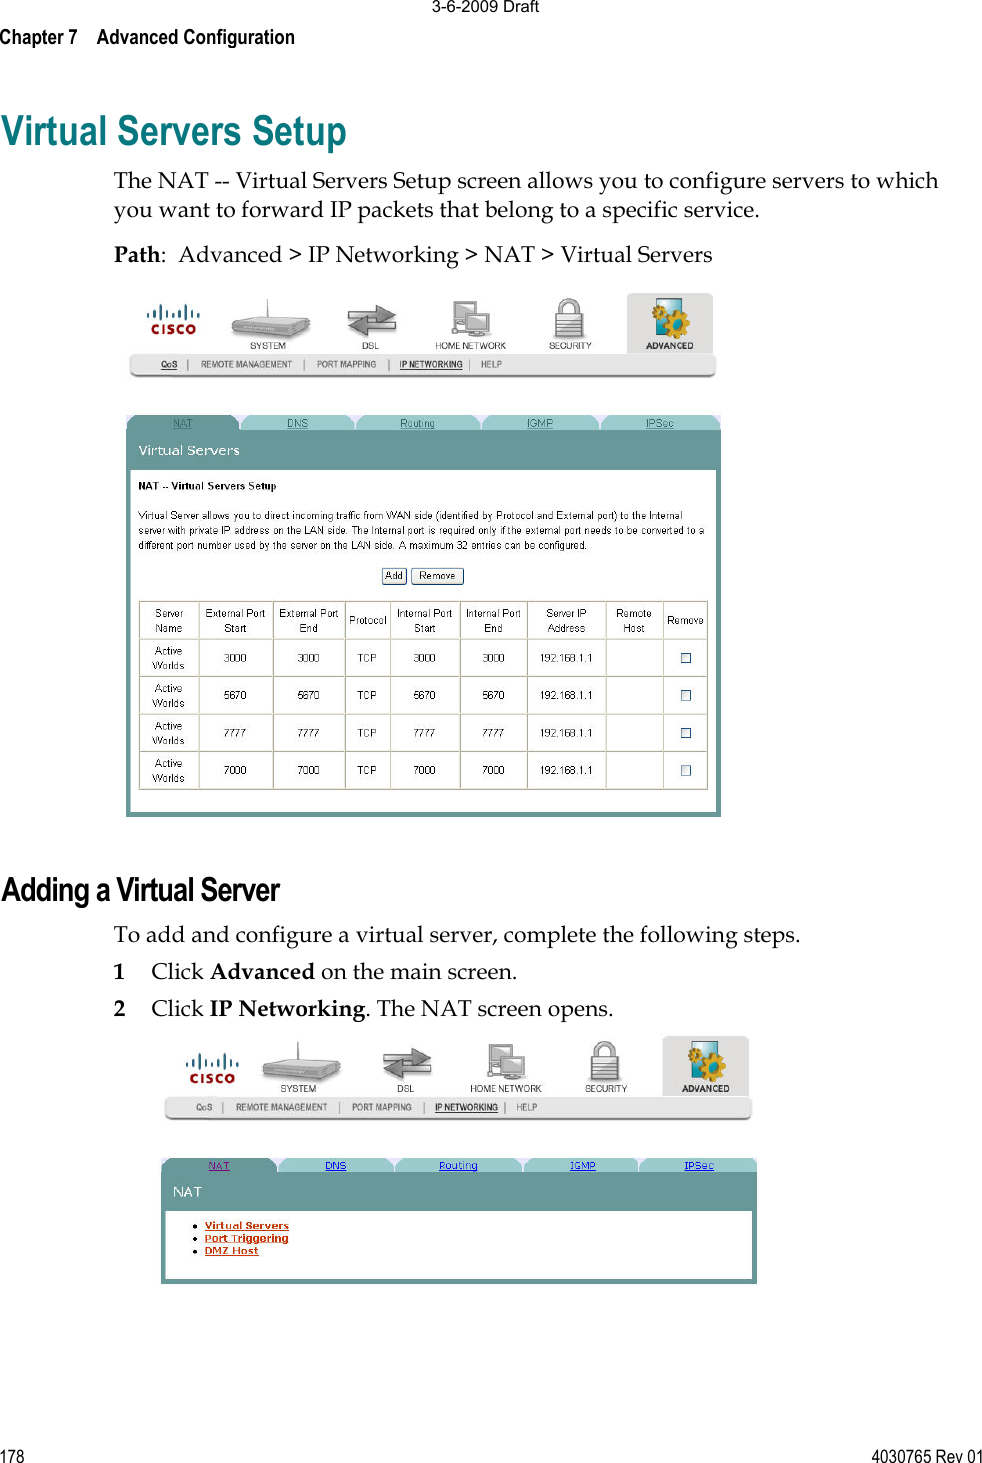 Chapter 7    Advanced Configuration 178 4030765 Rev 01Virtual Servers Setup The NAT -- Virtual Servers Setup screen allows you to configure servers to which you want to forward IP packets that belong to a specific service. Path:  Advanced &gt; IP Networking &gt; NAT &gt; Virtual Servers Adding a Virtual Server To add and configure a virtual server, complete the following steps.  1Click Advanced on the main screen.2Click IP Networking. The NAT screen opens. 3-6-2009 Draft